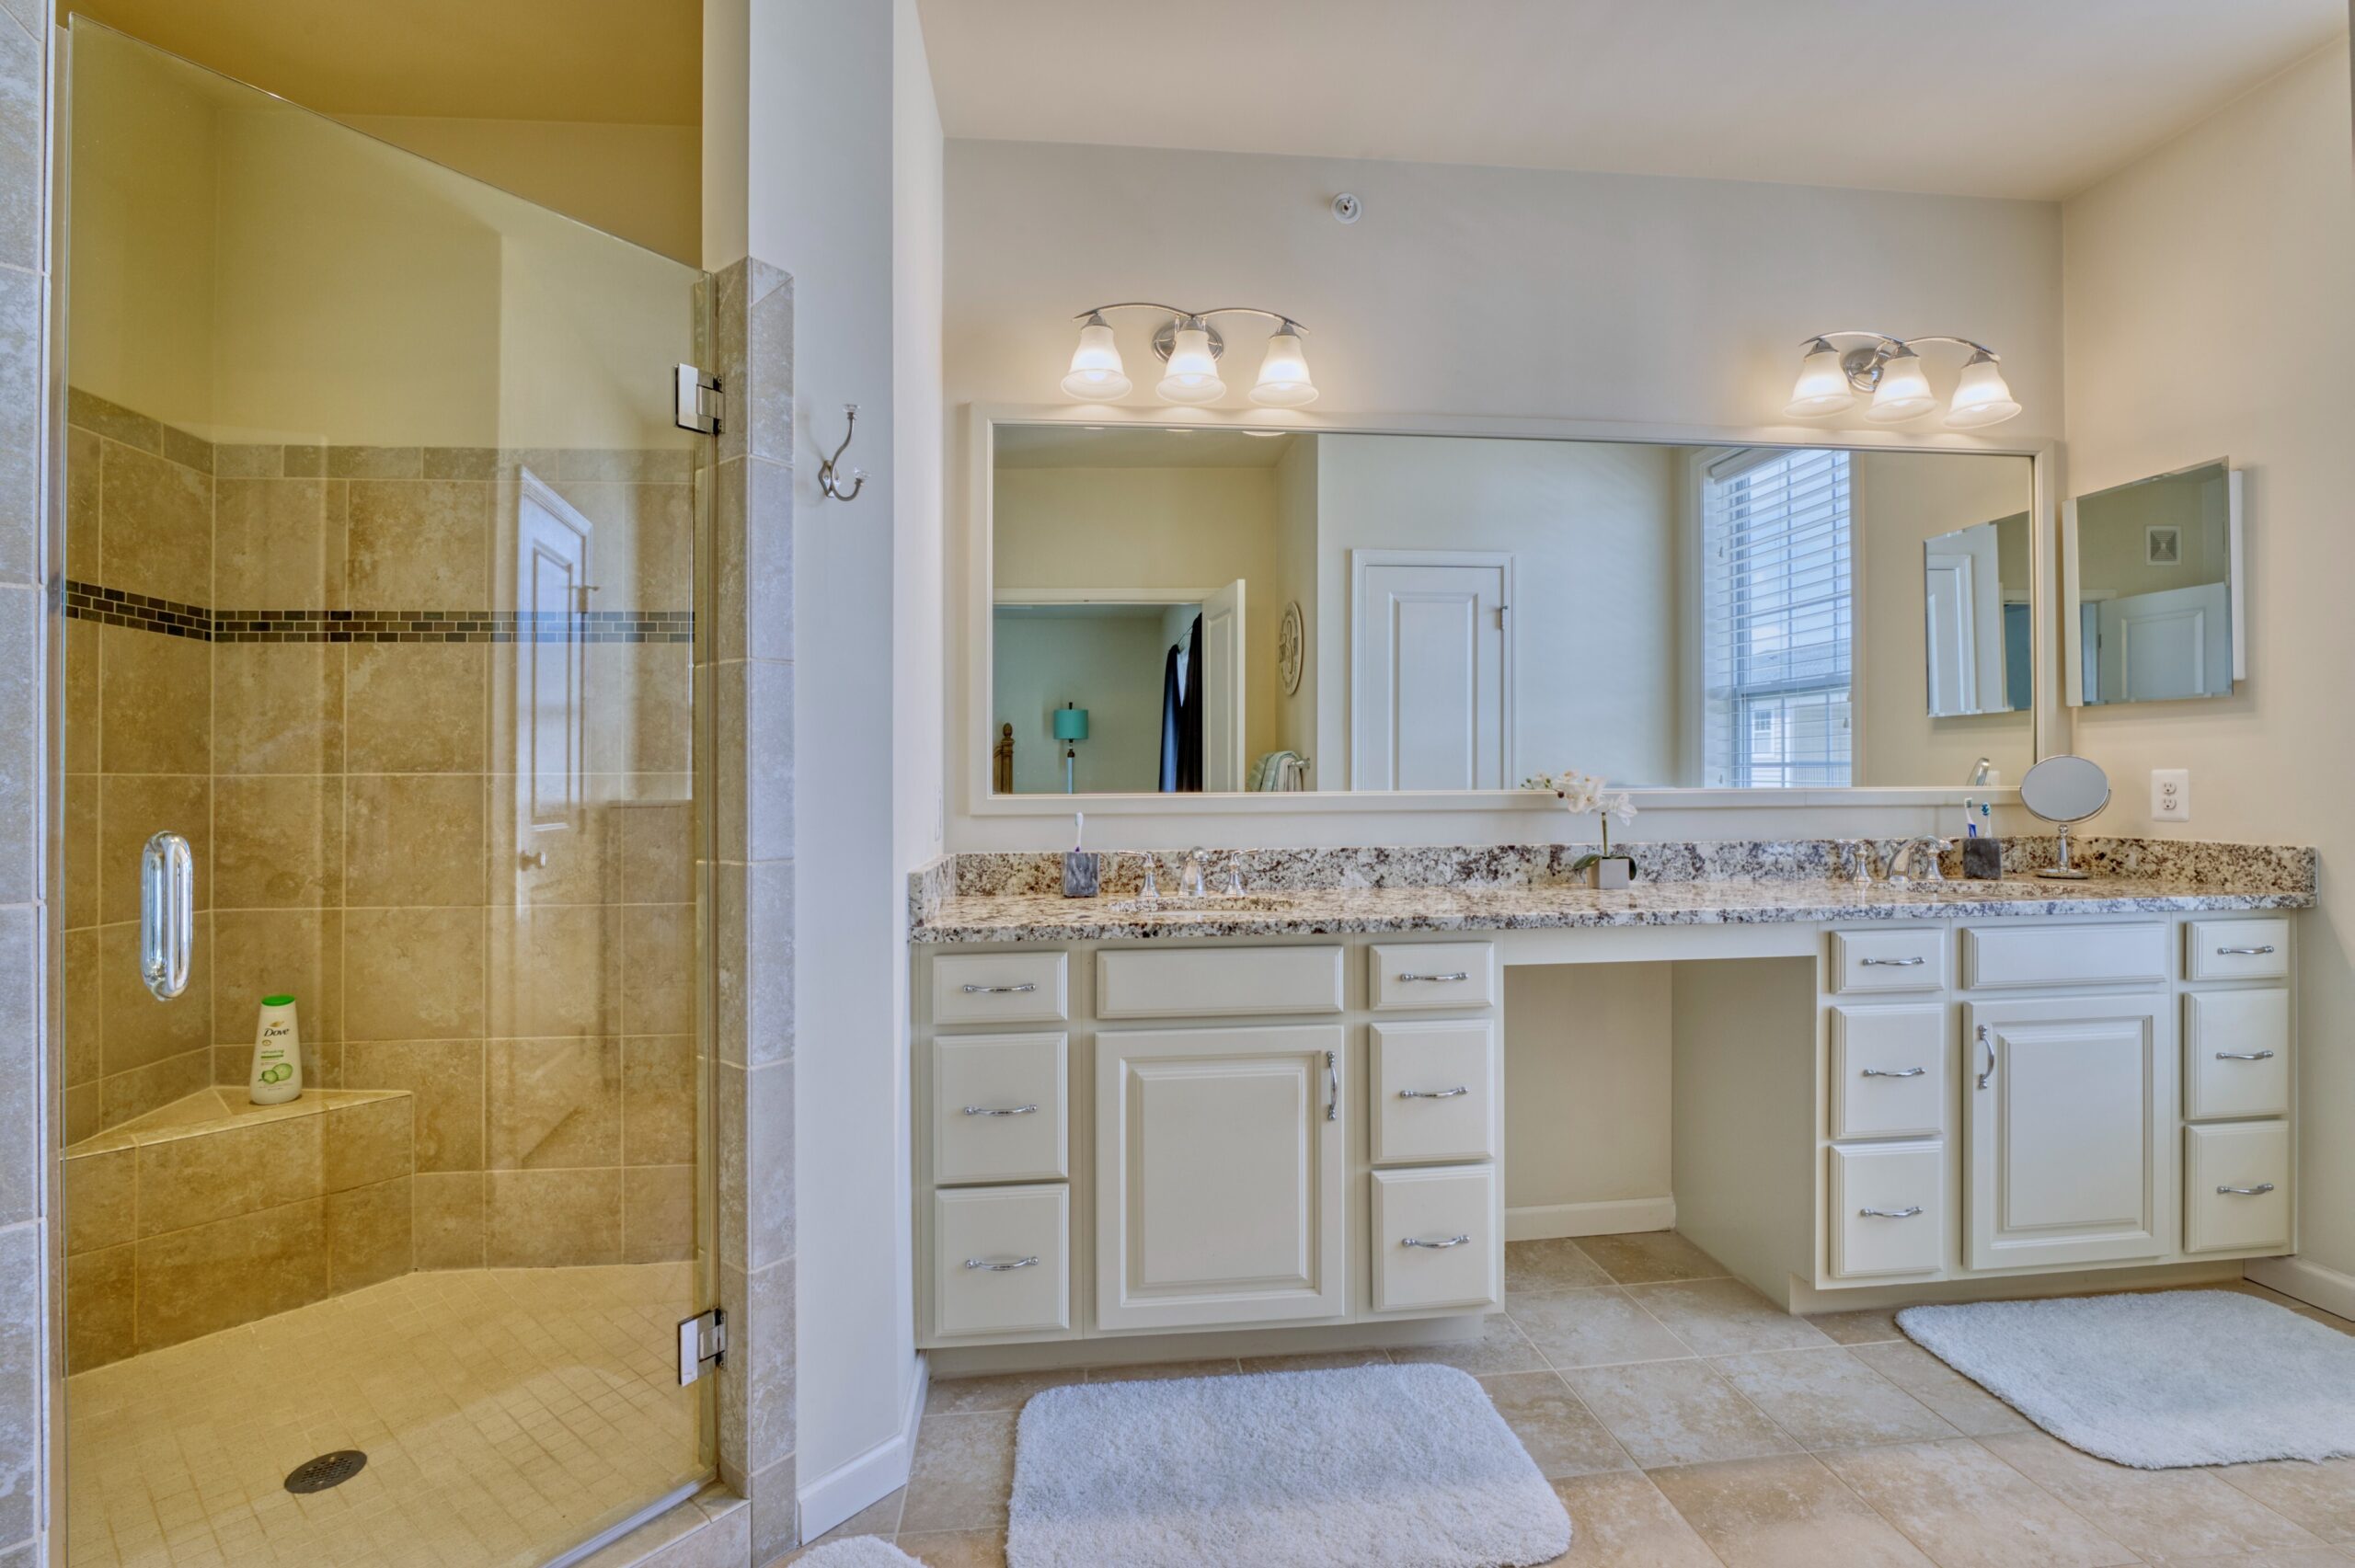 Professional interior photo of 23560 Buckland Farm Ter, Ashburn, VA - Showing the primary bathroom with large tiled shower with bench and dual-vanity with granite counters